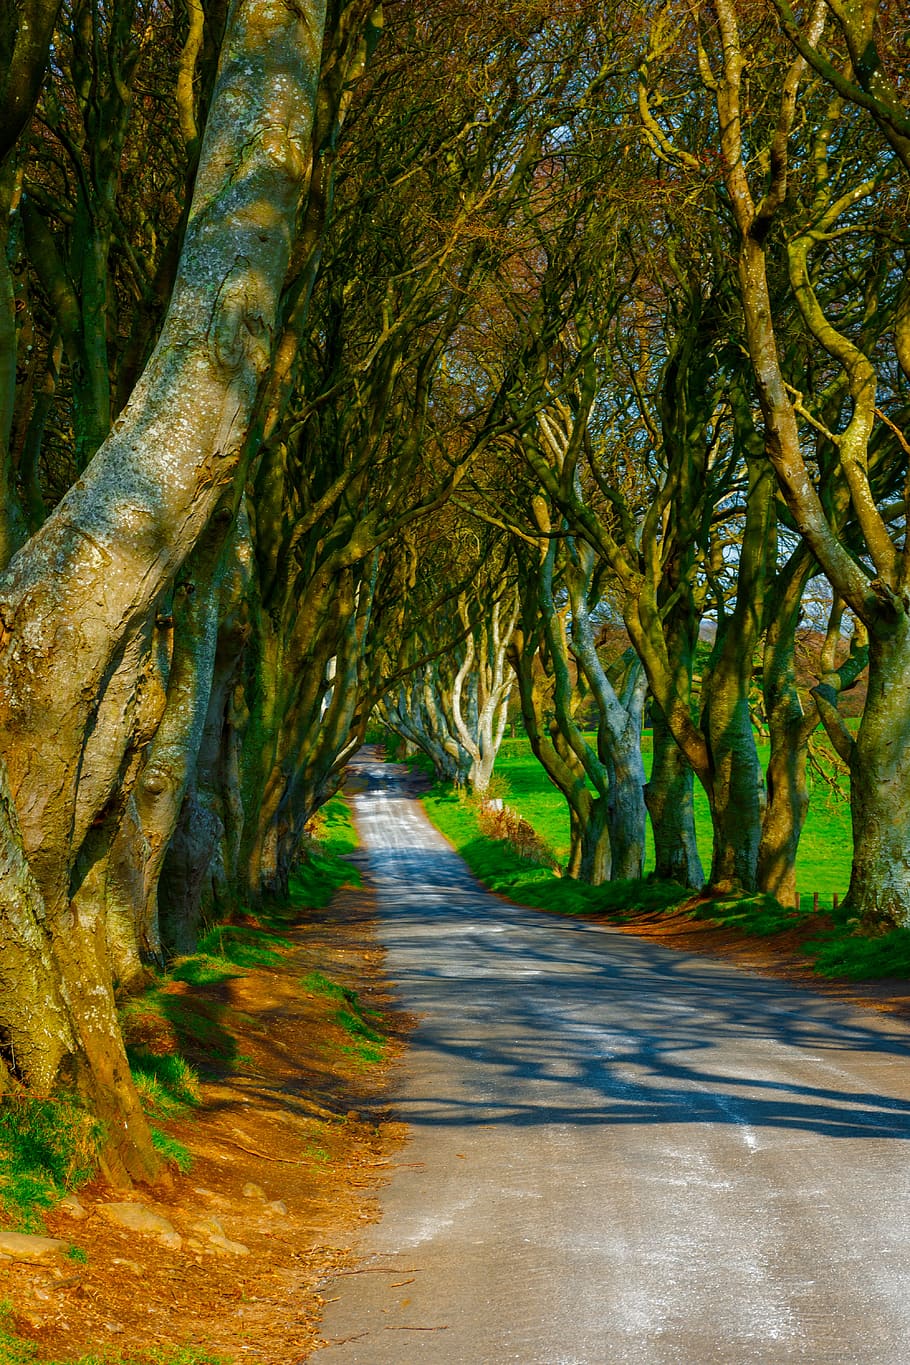 Hd Wallpaper Trees Dark Hedges Ireland Road Mysterious Pathway Mystical Wallpaper Flare